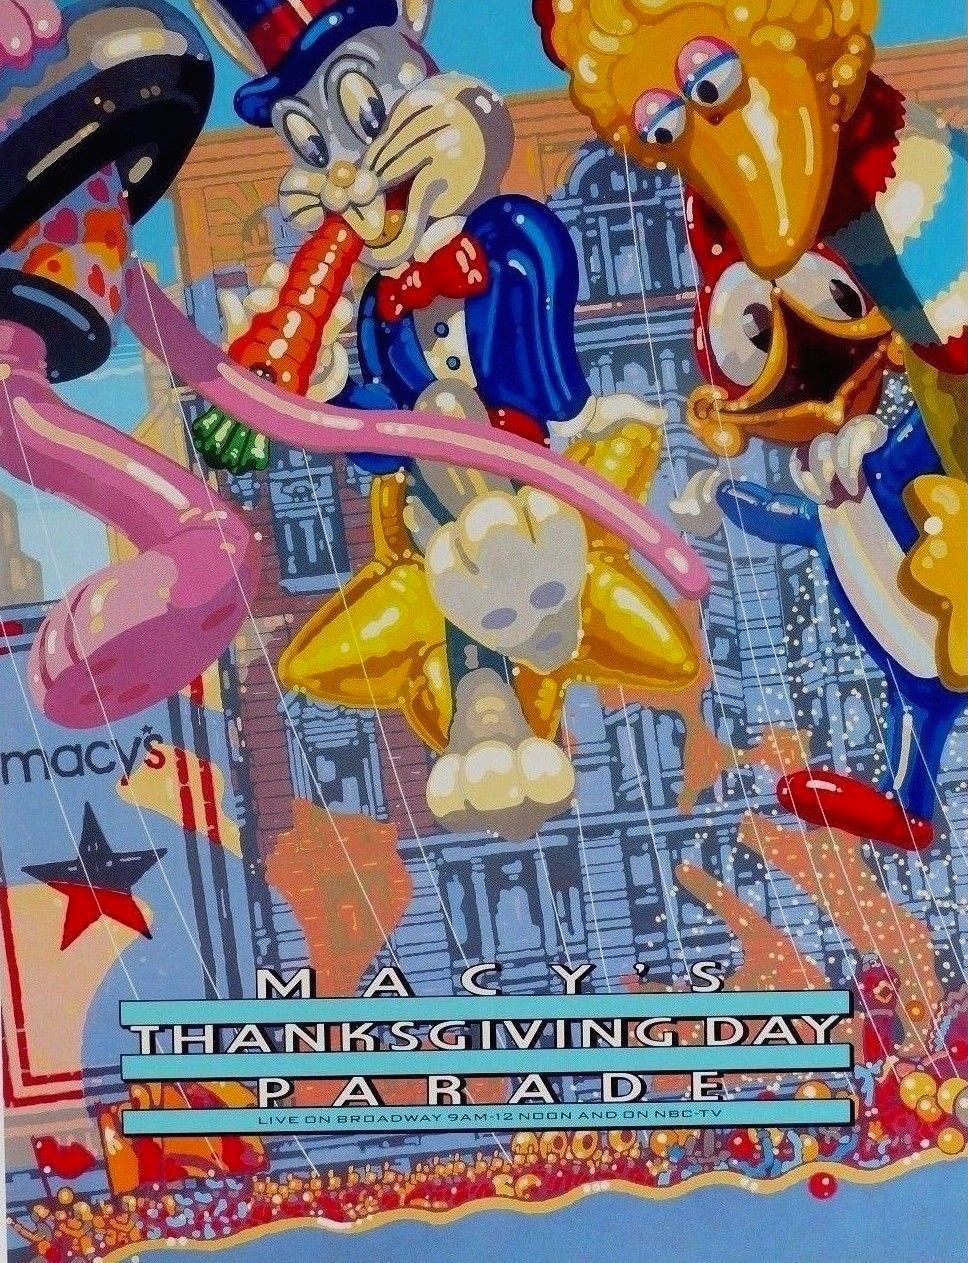 1989 Macy's Thanksgiving Day Parade (found NBC broadcast of parade